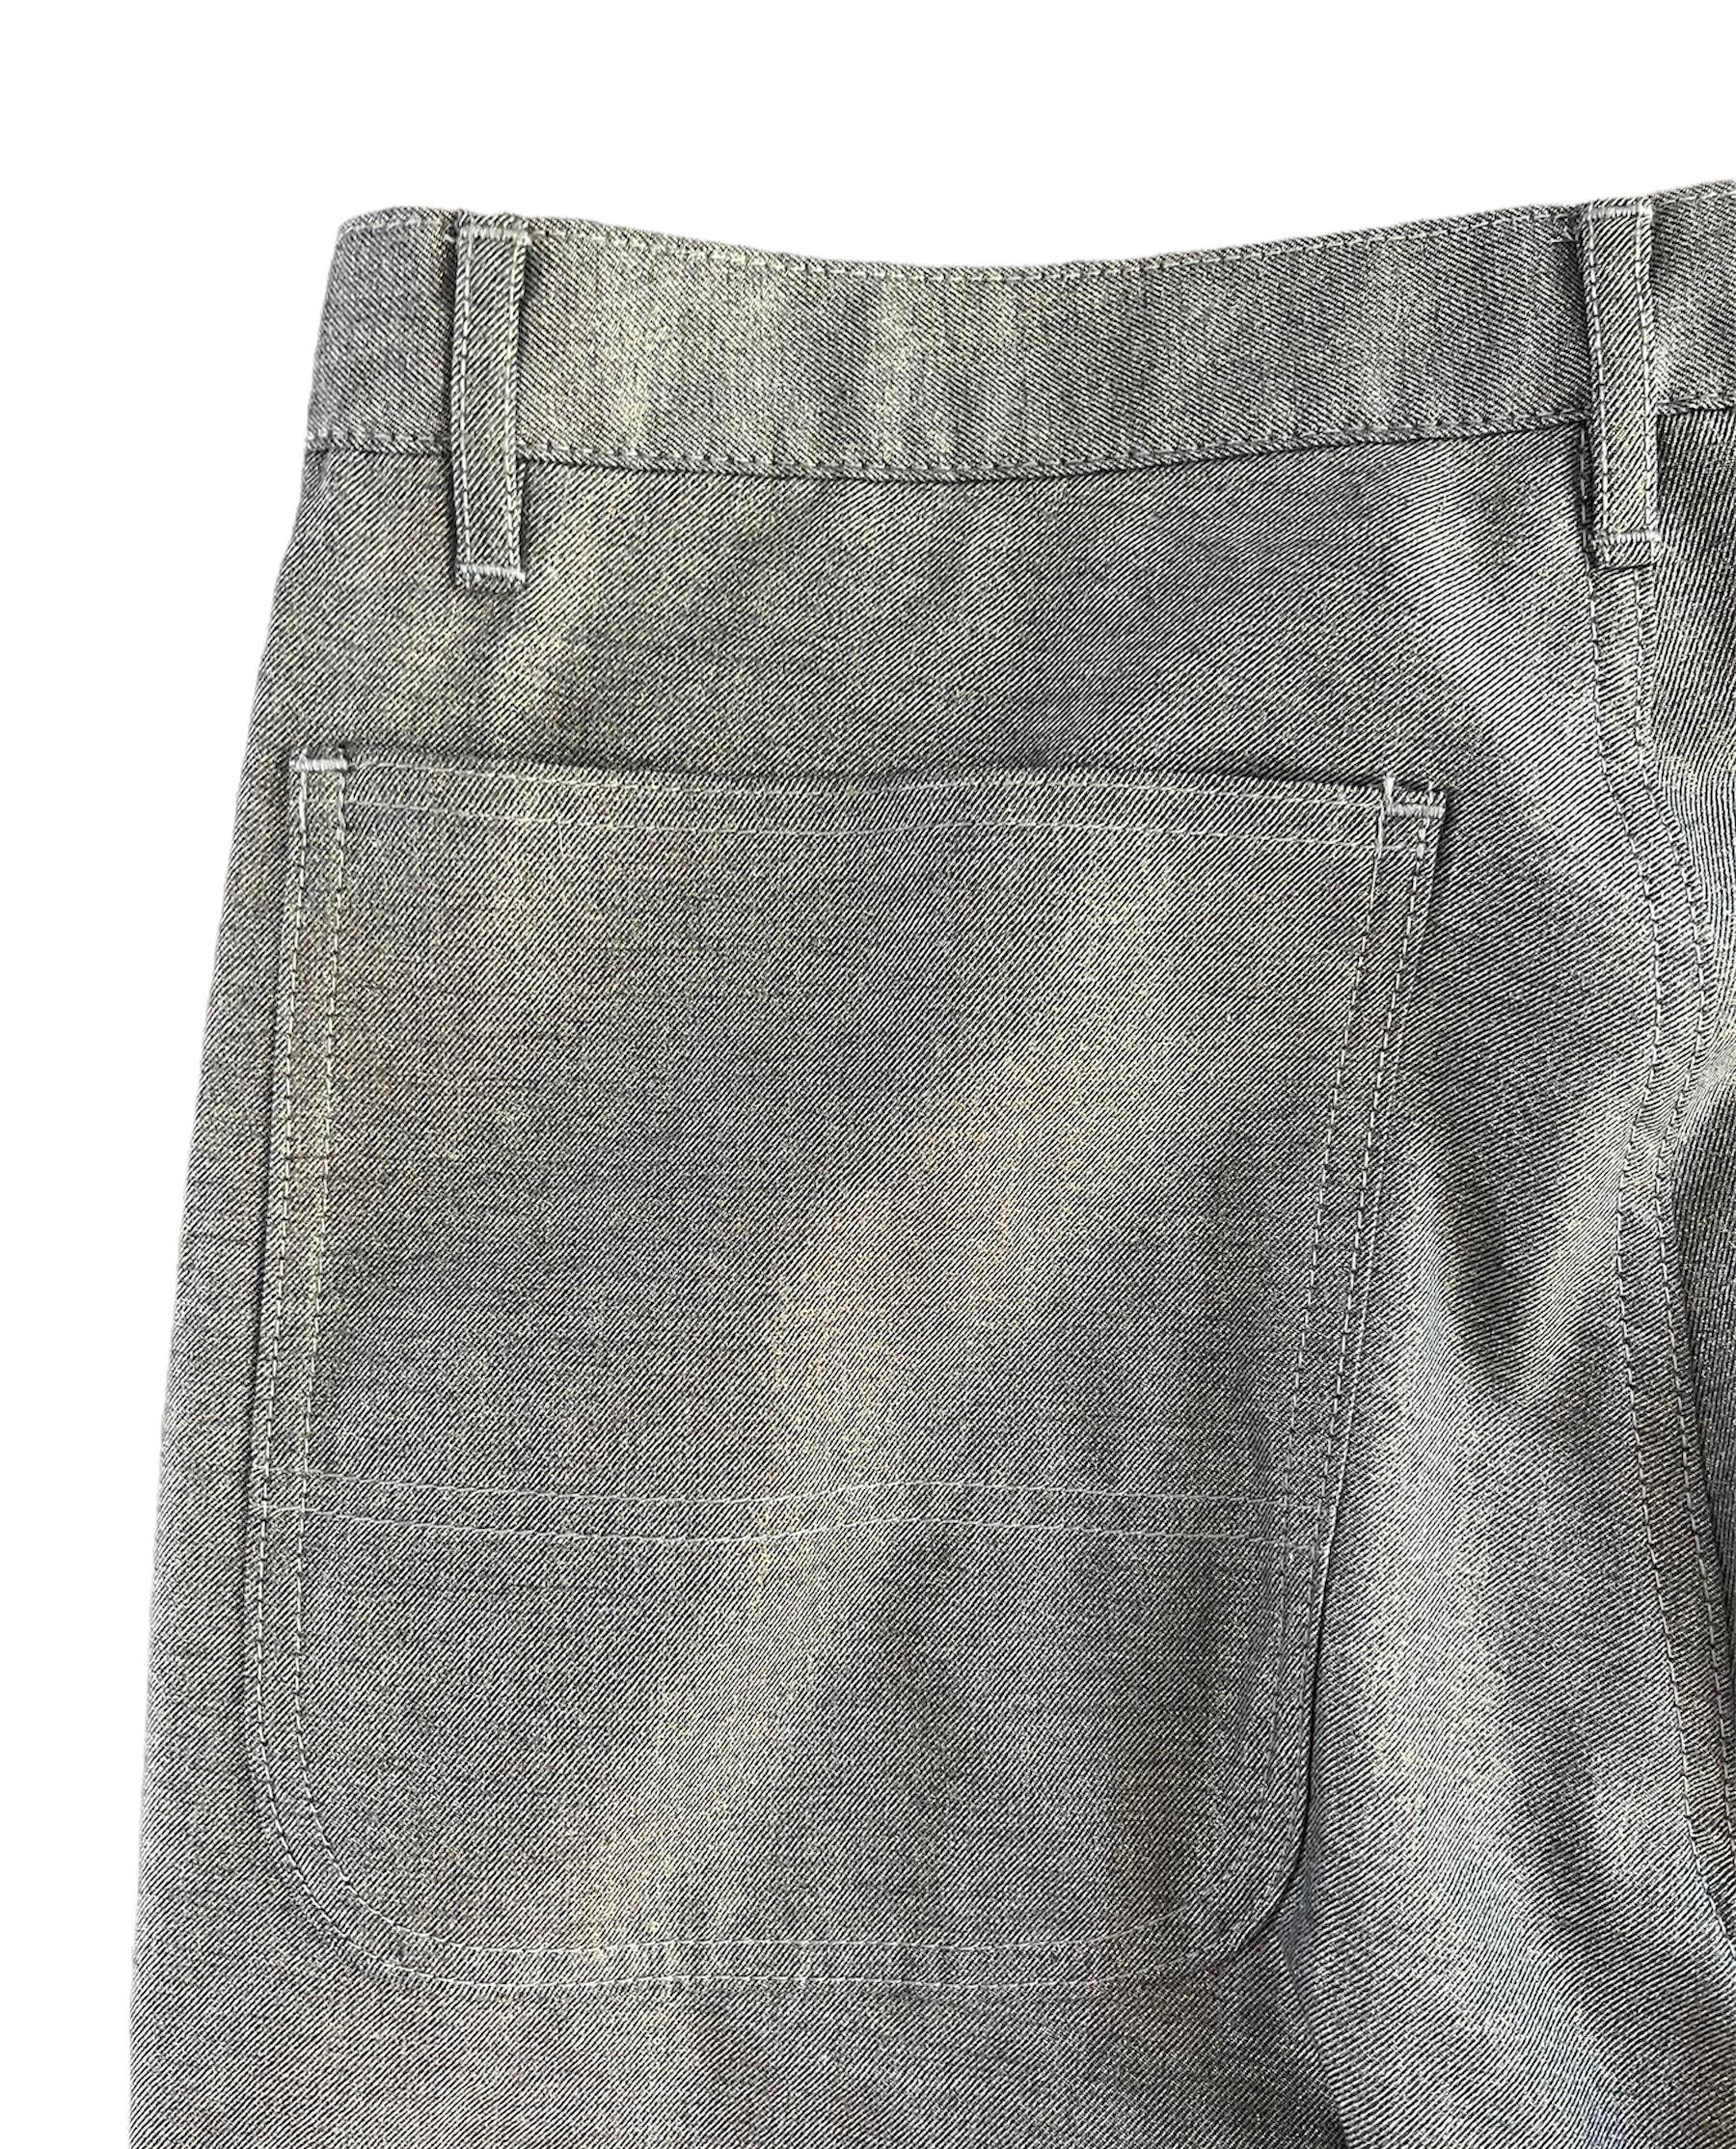 Comme des Garçons Grey Wool Trousers Pants, Size Medium In New Condition For Sale In Beverly Hills, CA